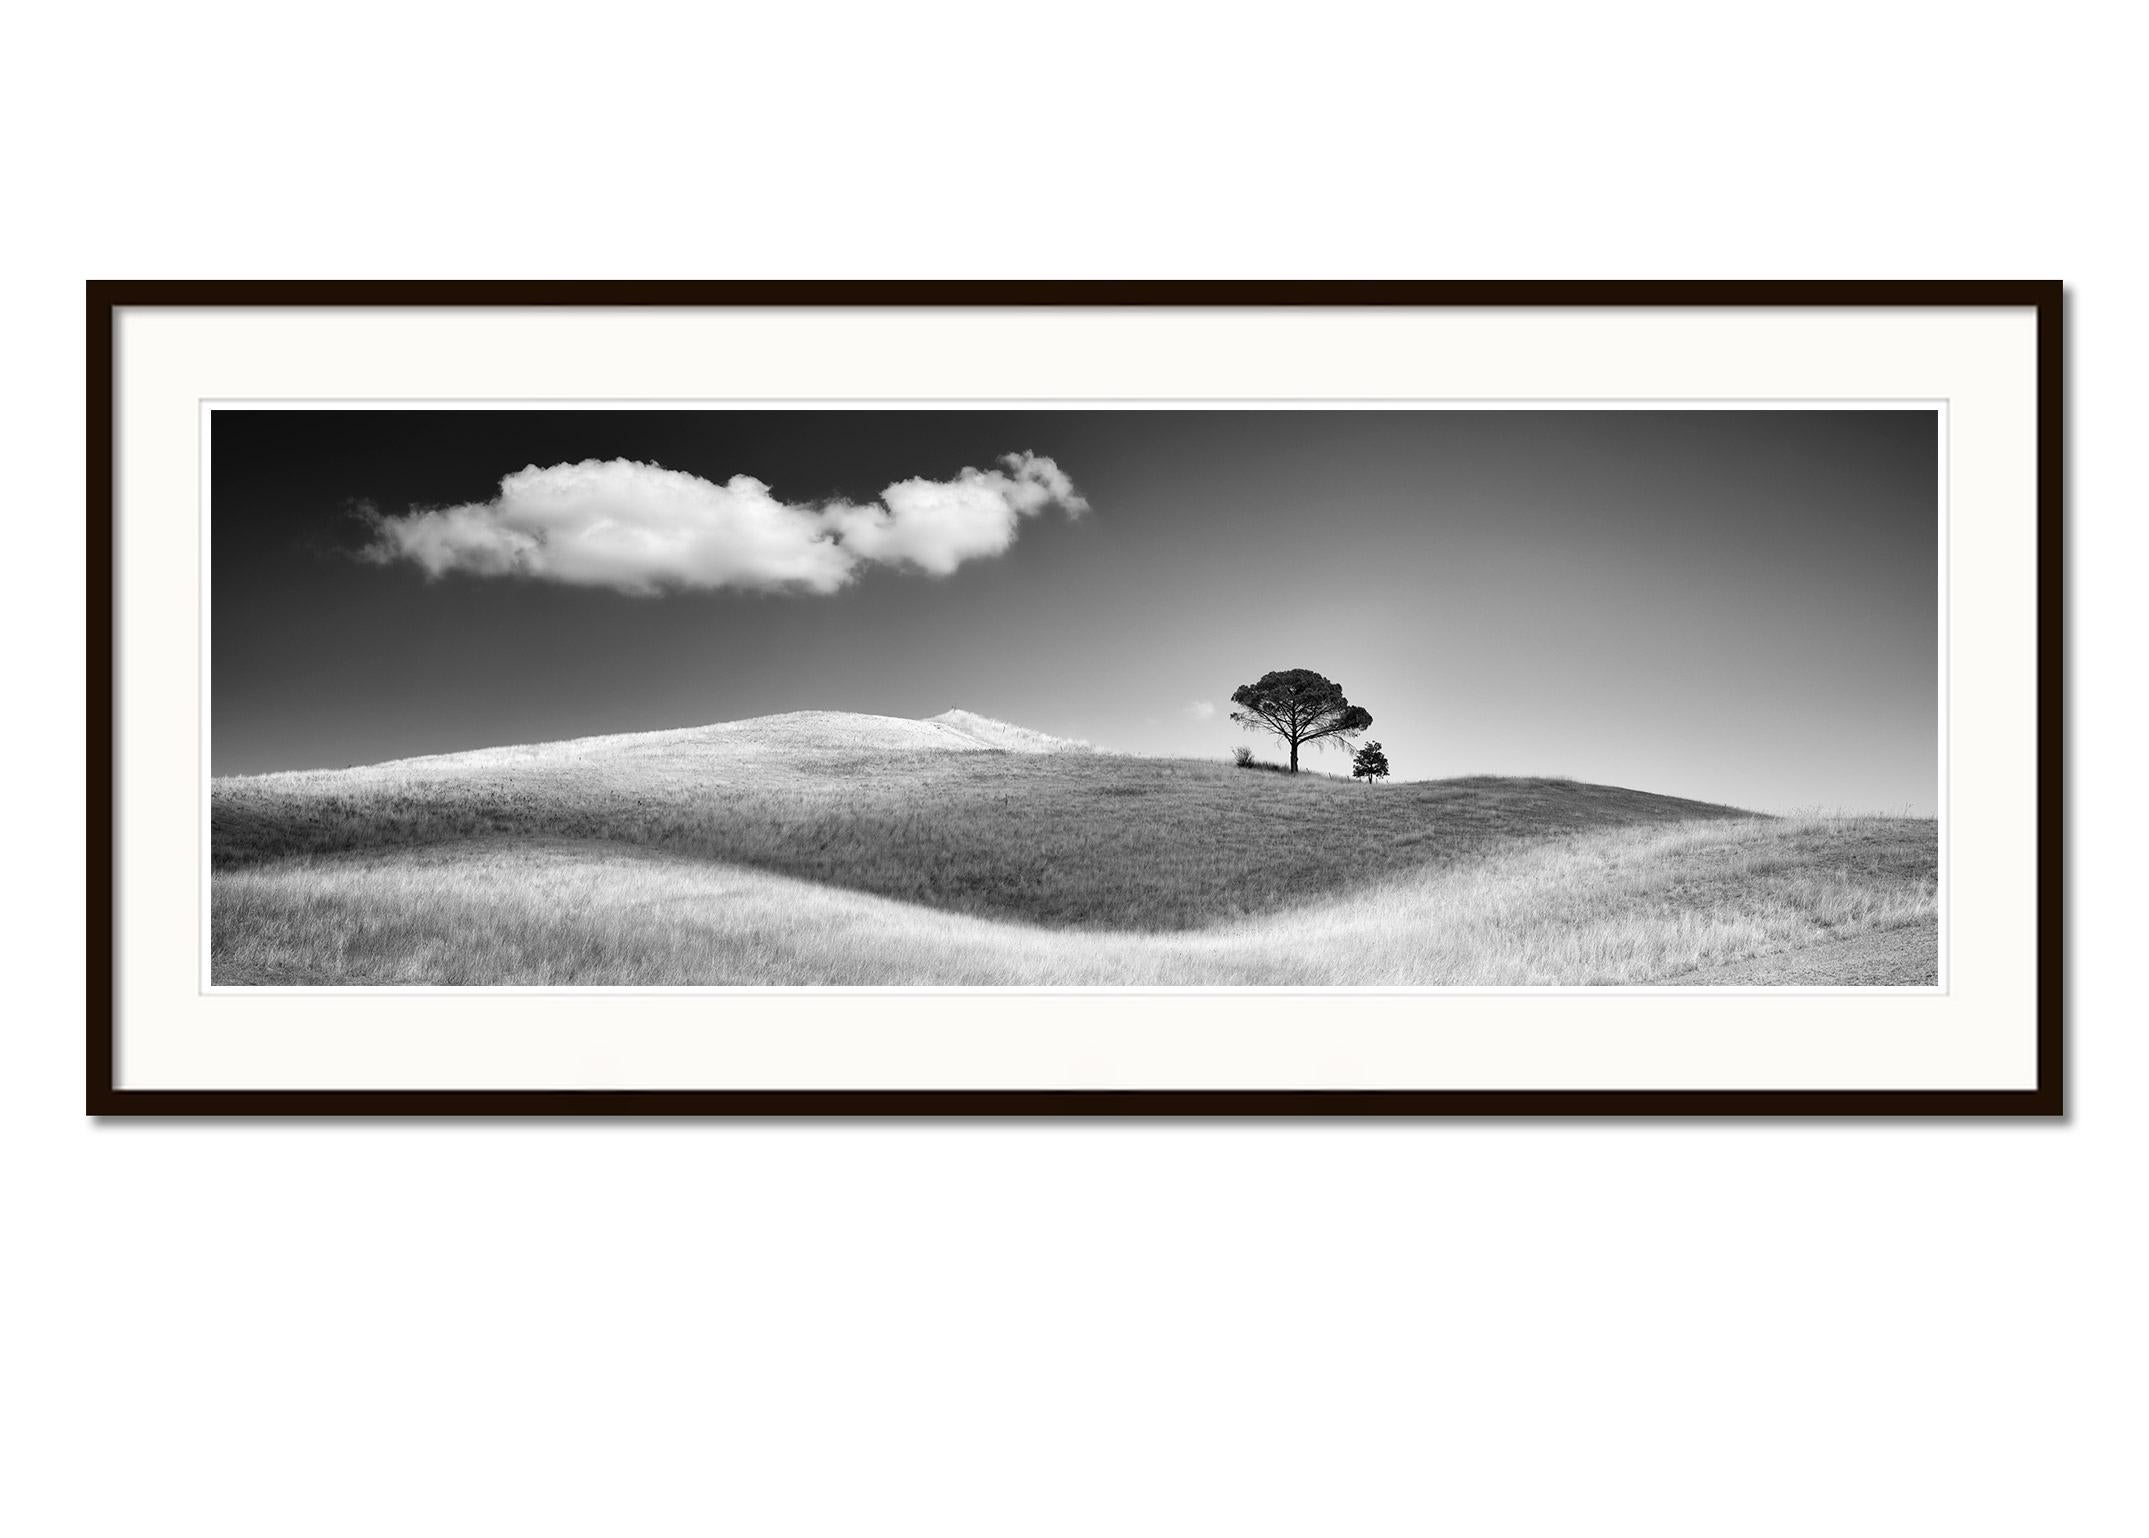 Italian Stone Pines, Tuscany, Italy, black and white photography, art landscape - Gray Landscape Photograph by Gerald Berghammer